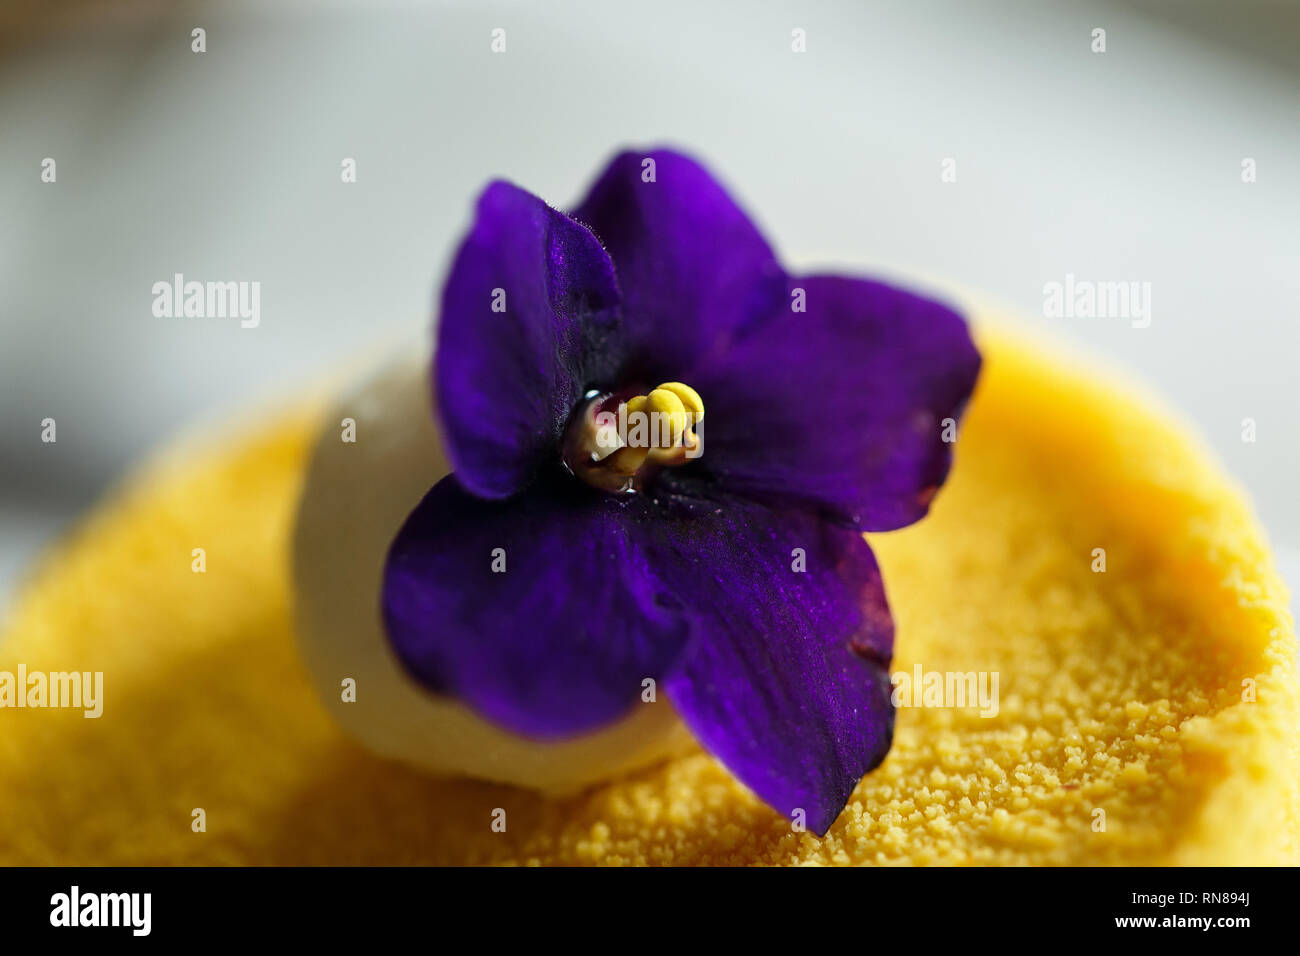 Purple violet flower with yellow pistil decorating a passion fruit dessert, shot close up on a macro lens Stock Photo